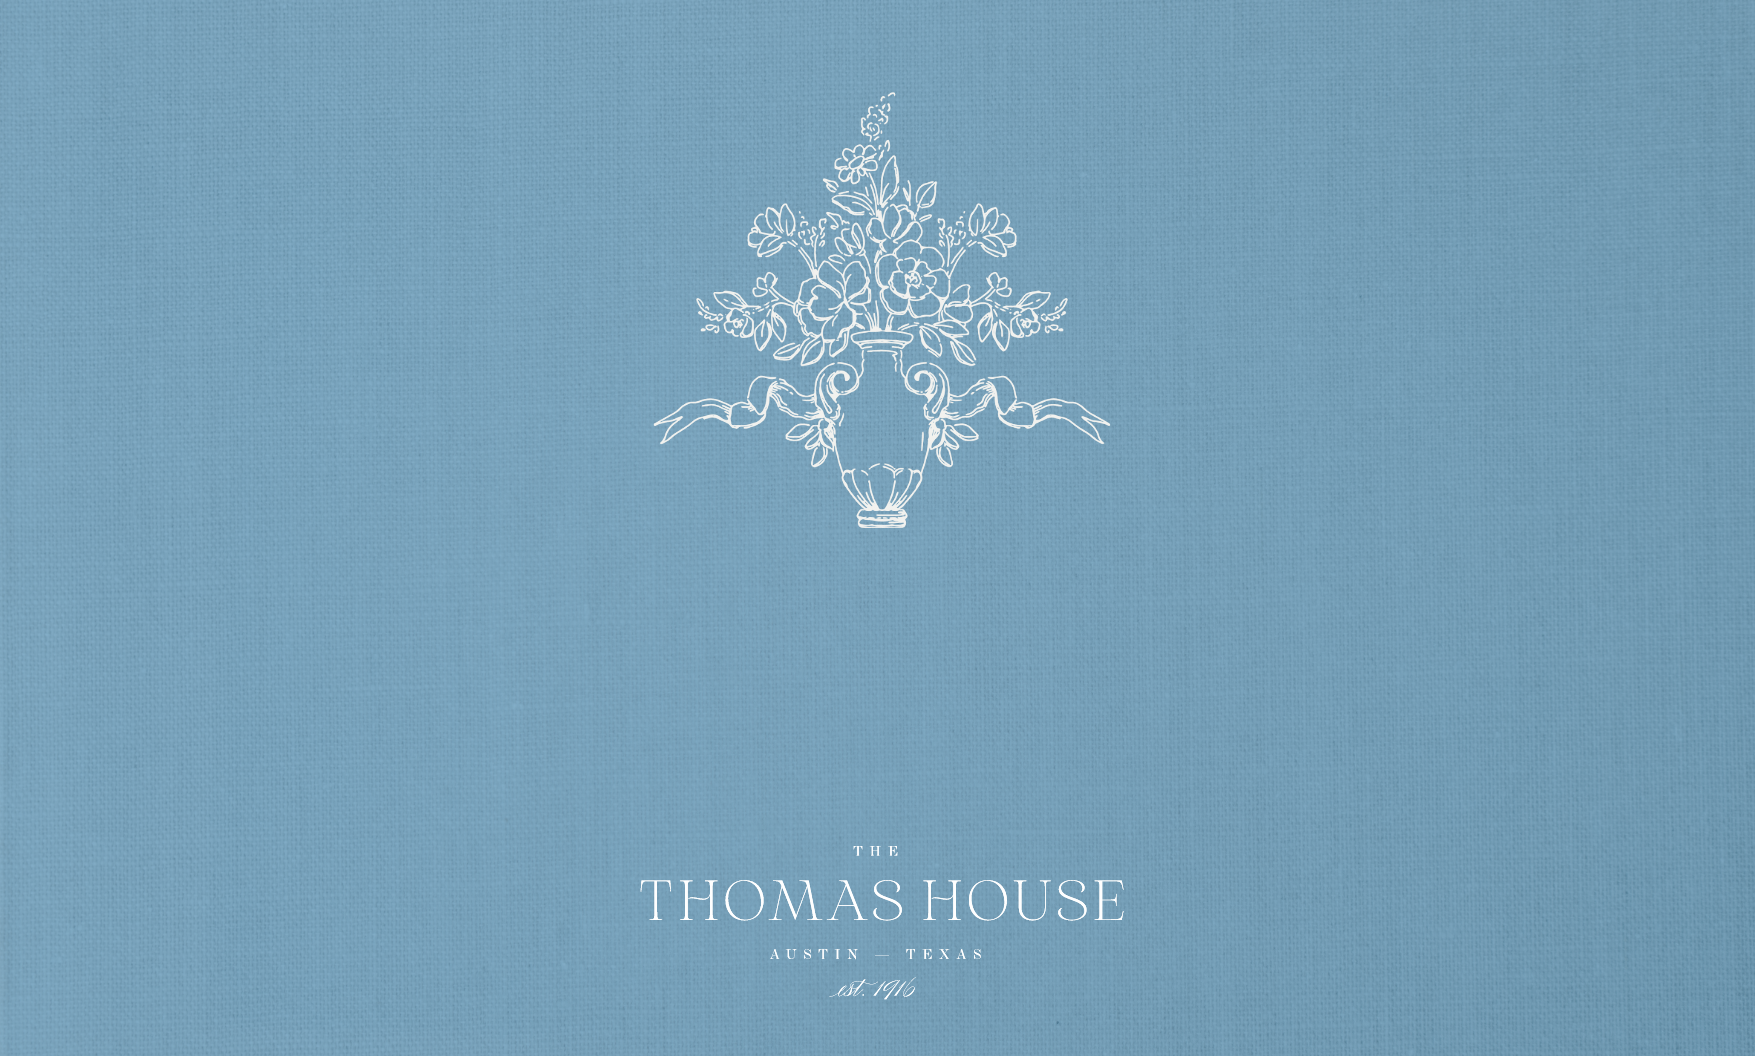 Whimsical Romantic Wedding Venue Brand inspired by the Regency Era - The Thomas House - by Sarah Ann Design